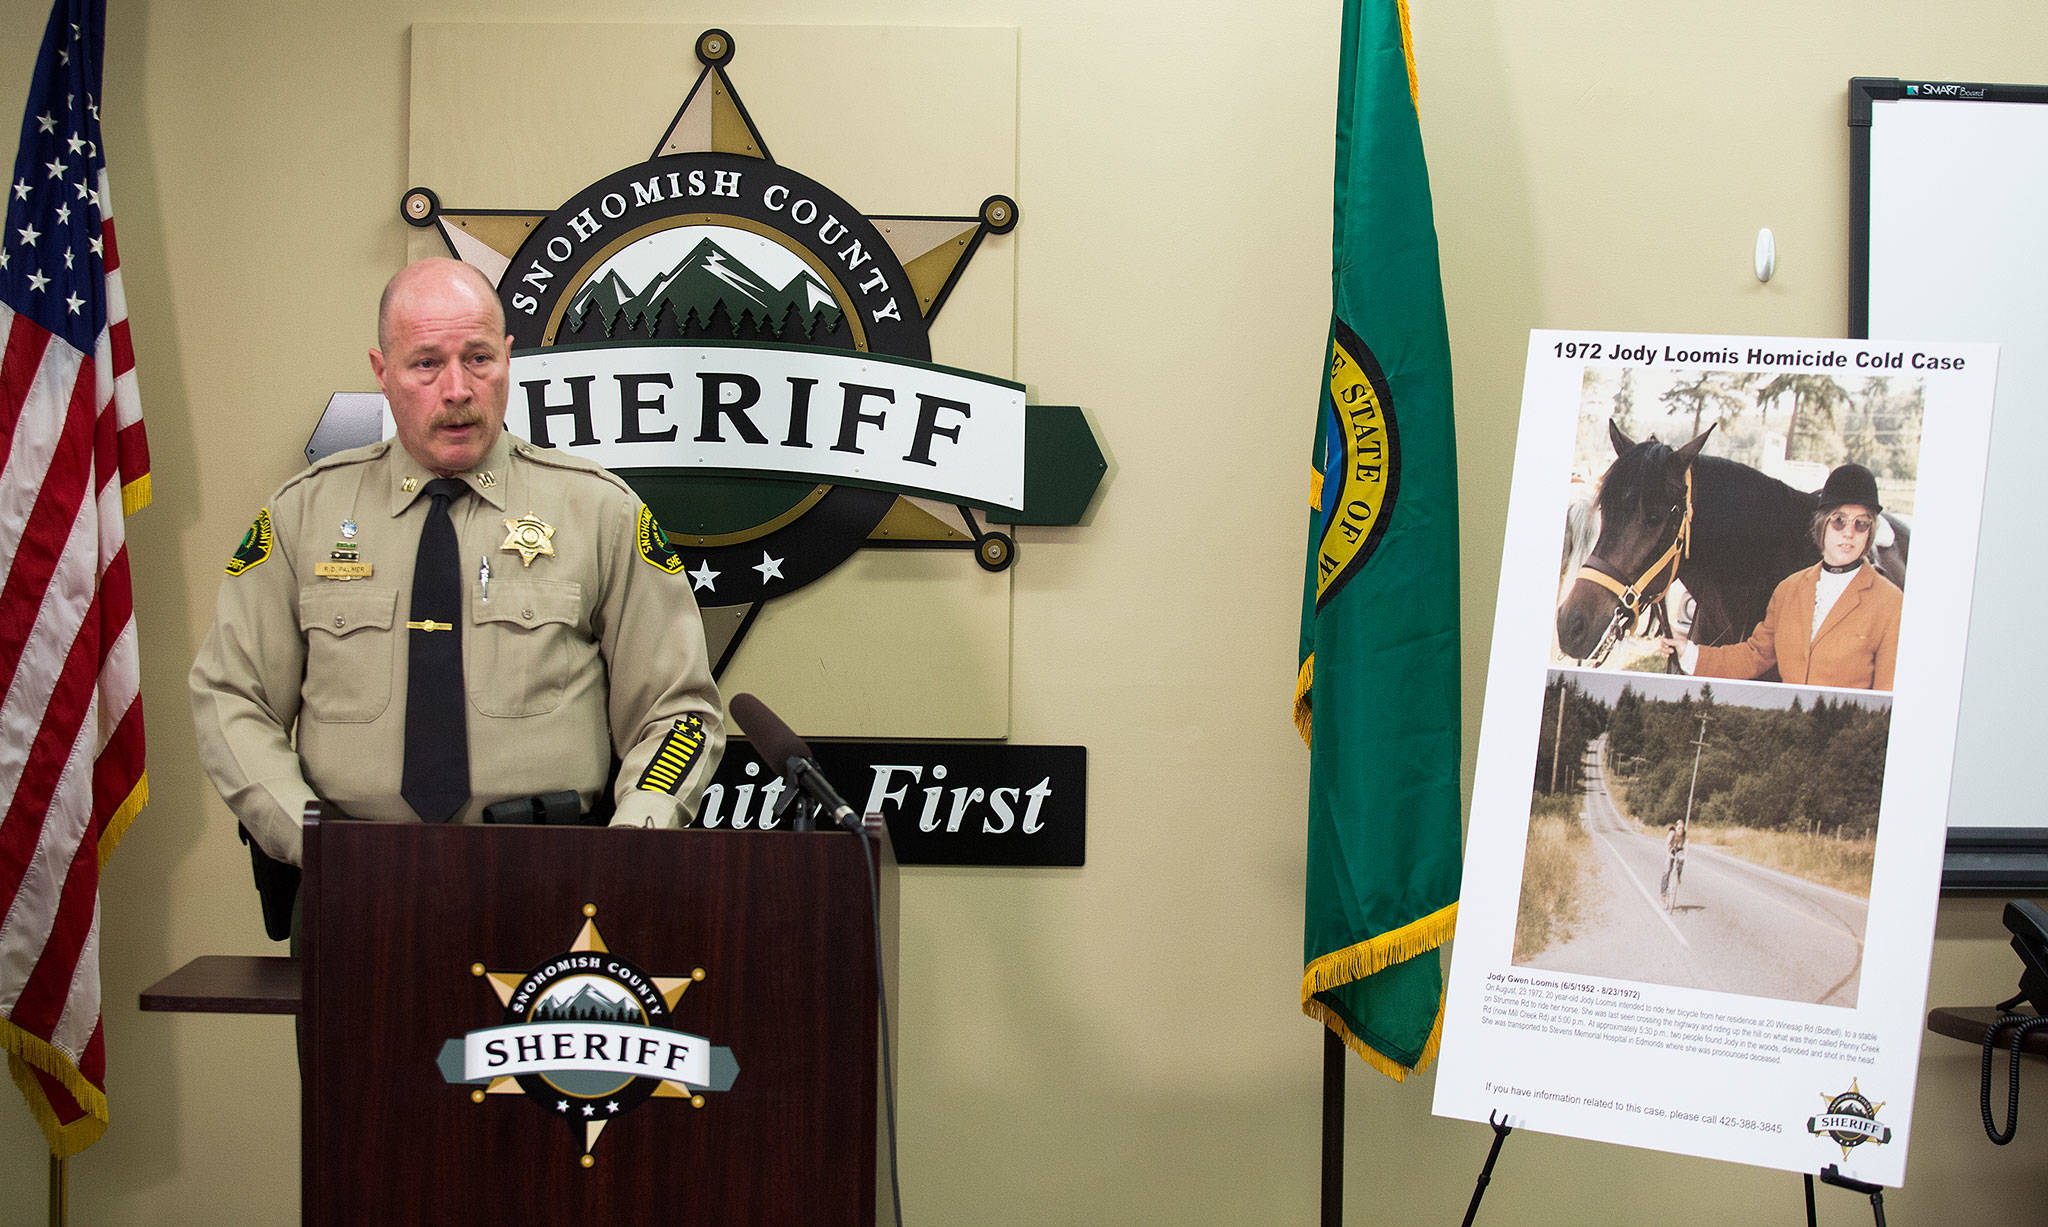 Snohomish County Sheriff’s Office Capt. Rob Palmer talks to the media about the arrest of a suspect in the murder of Jody Loomis, a cold case from 1972, at the Snohomish County Courthouse on Thursday, April 11, 2019 in Everett, Wash. It’s the second major cold case that Snohomish County detectives say they’ve solved with the help of genetic genealogy. (Andy Bronson / The Herald)